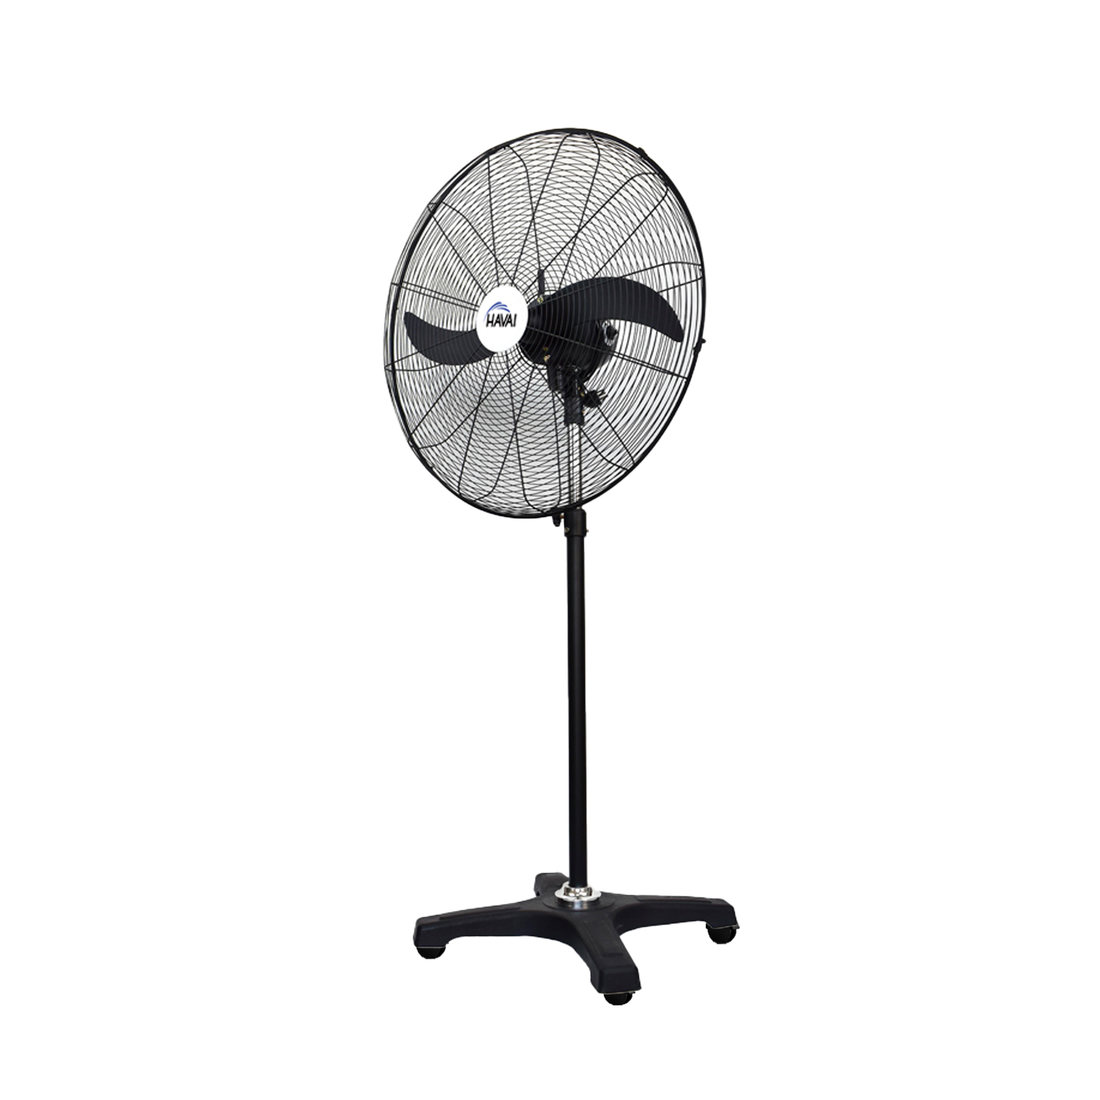 HAVAI BLDC Pedestal Fan 26 inch, 50% Savings on Electricity, High Velocity, Heavy Duty Metal for Industrial, Commercial and Residential Use, Assembly Included